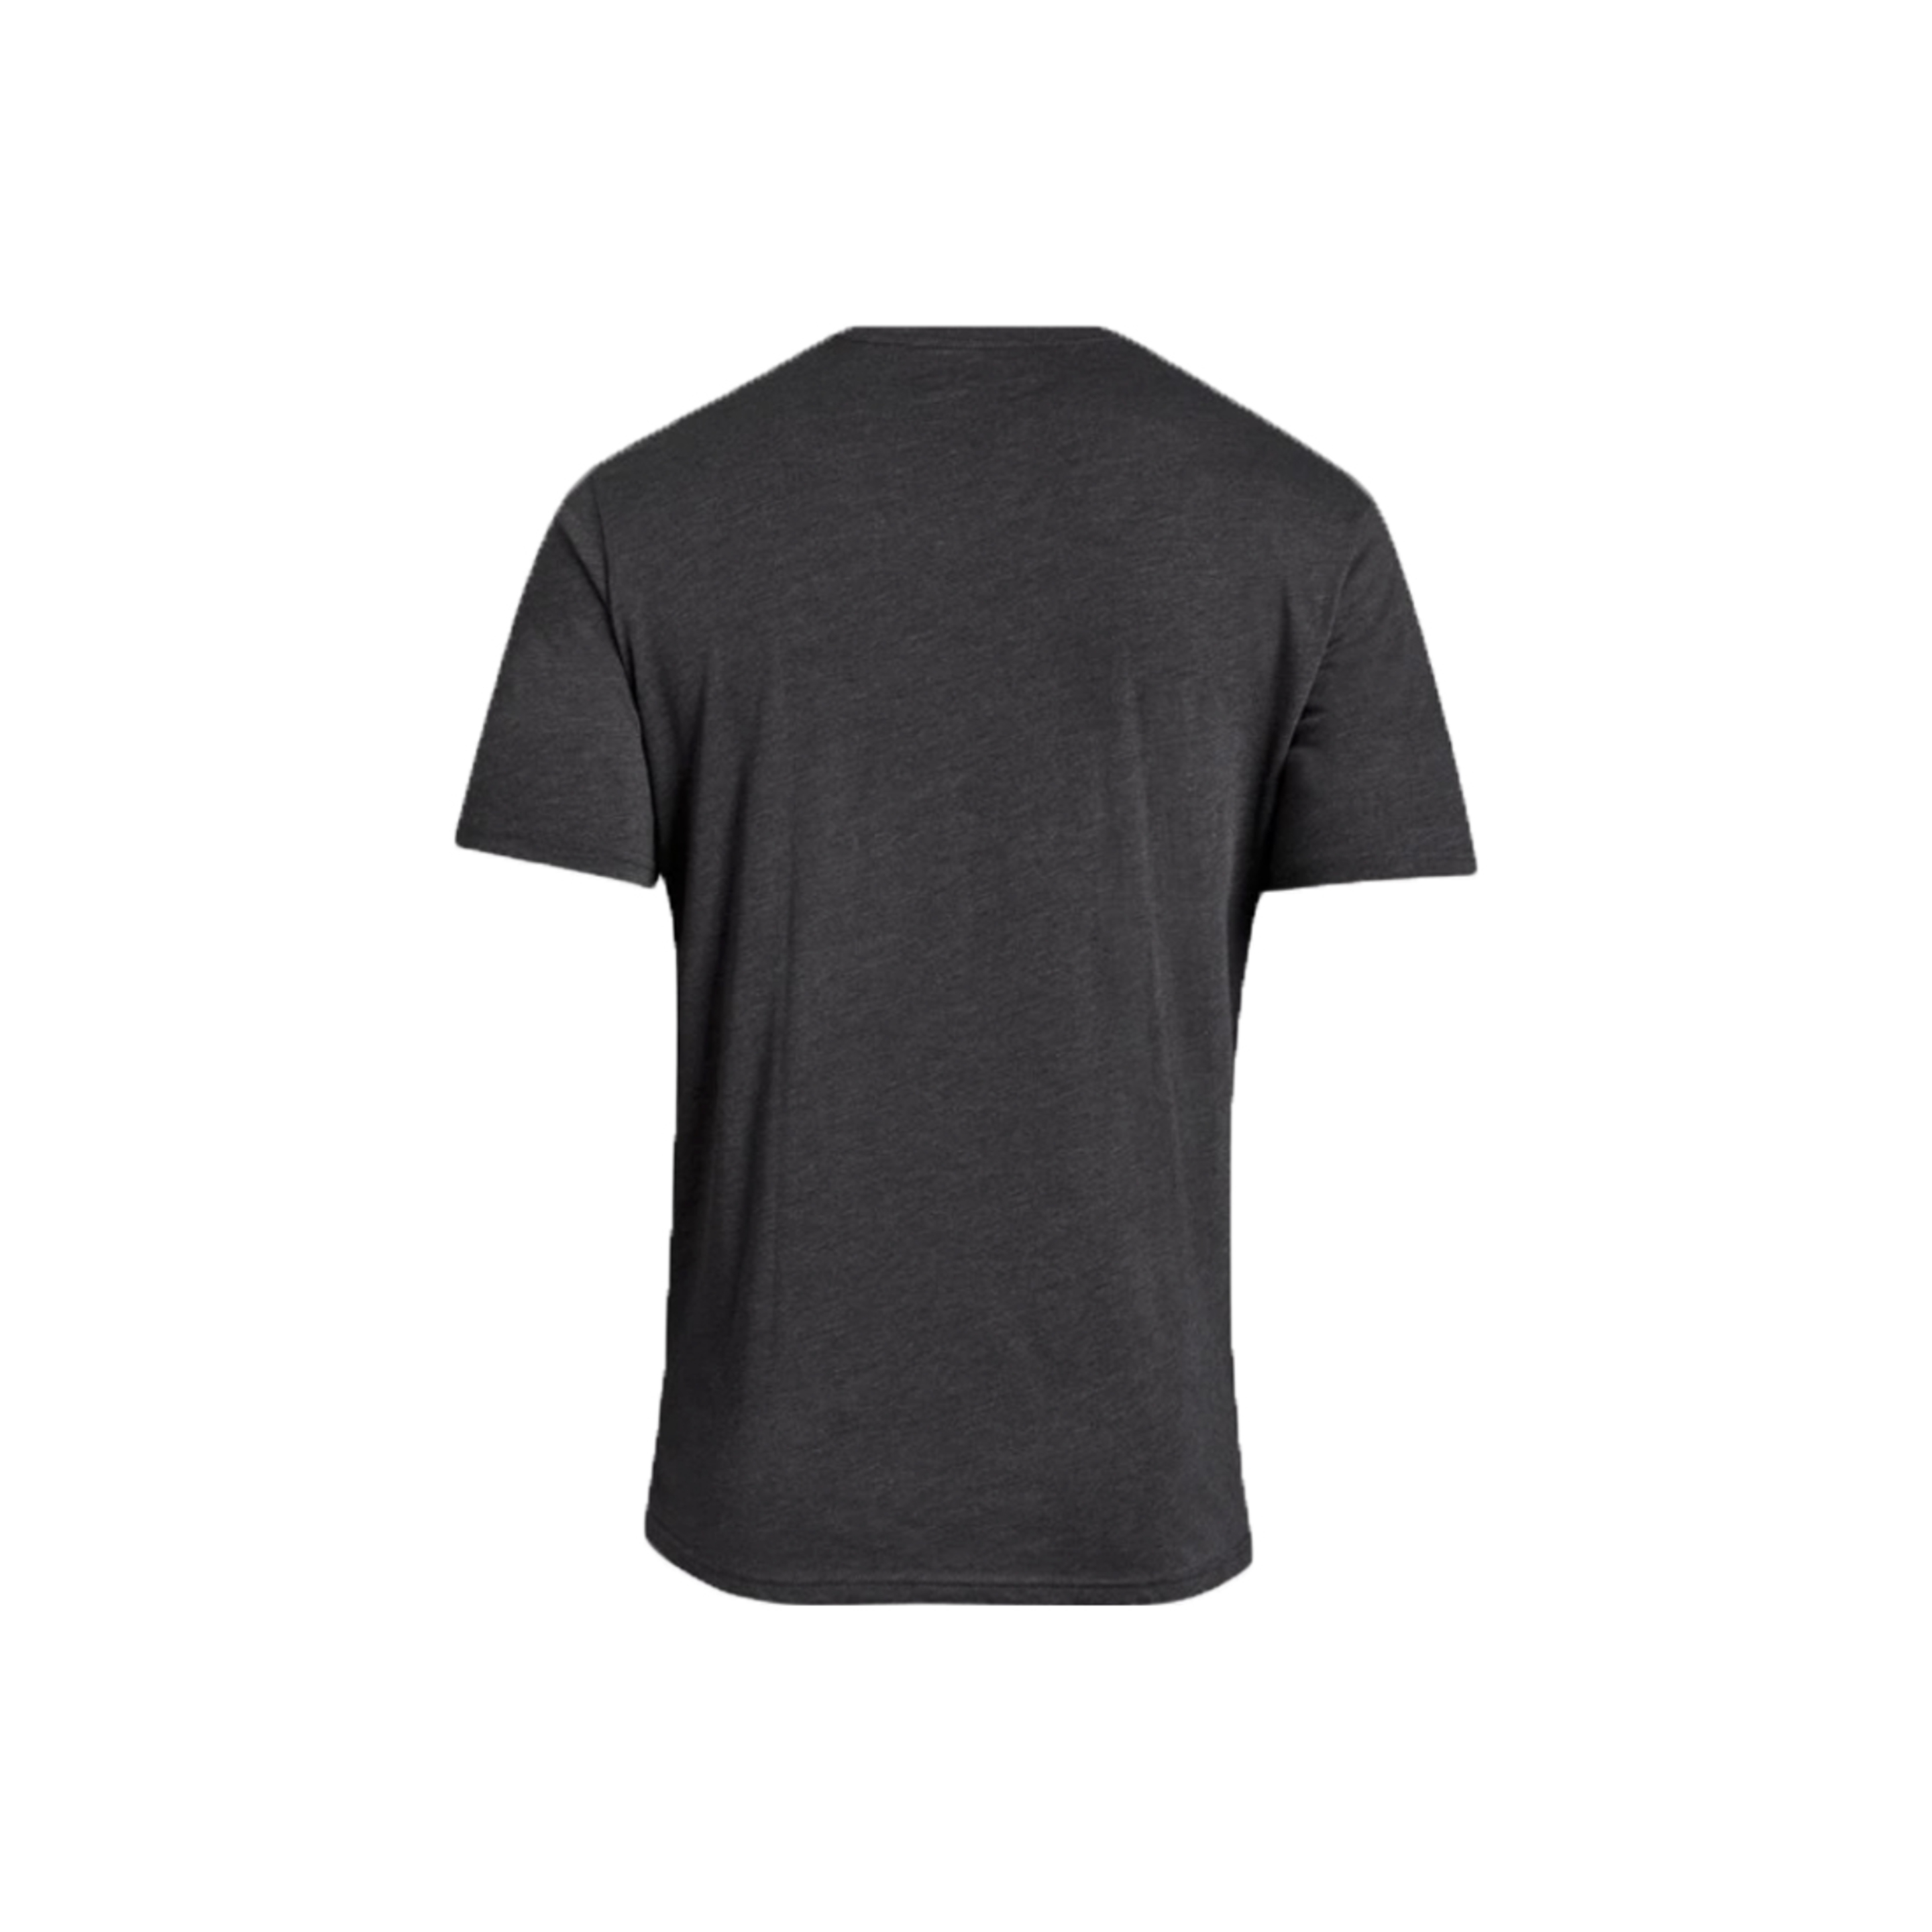 Under Armour Gl Foundation Ss Tee 1326849-019 - Gris - Hombres, Gris, Camiseta  MKP